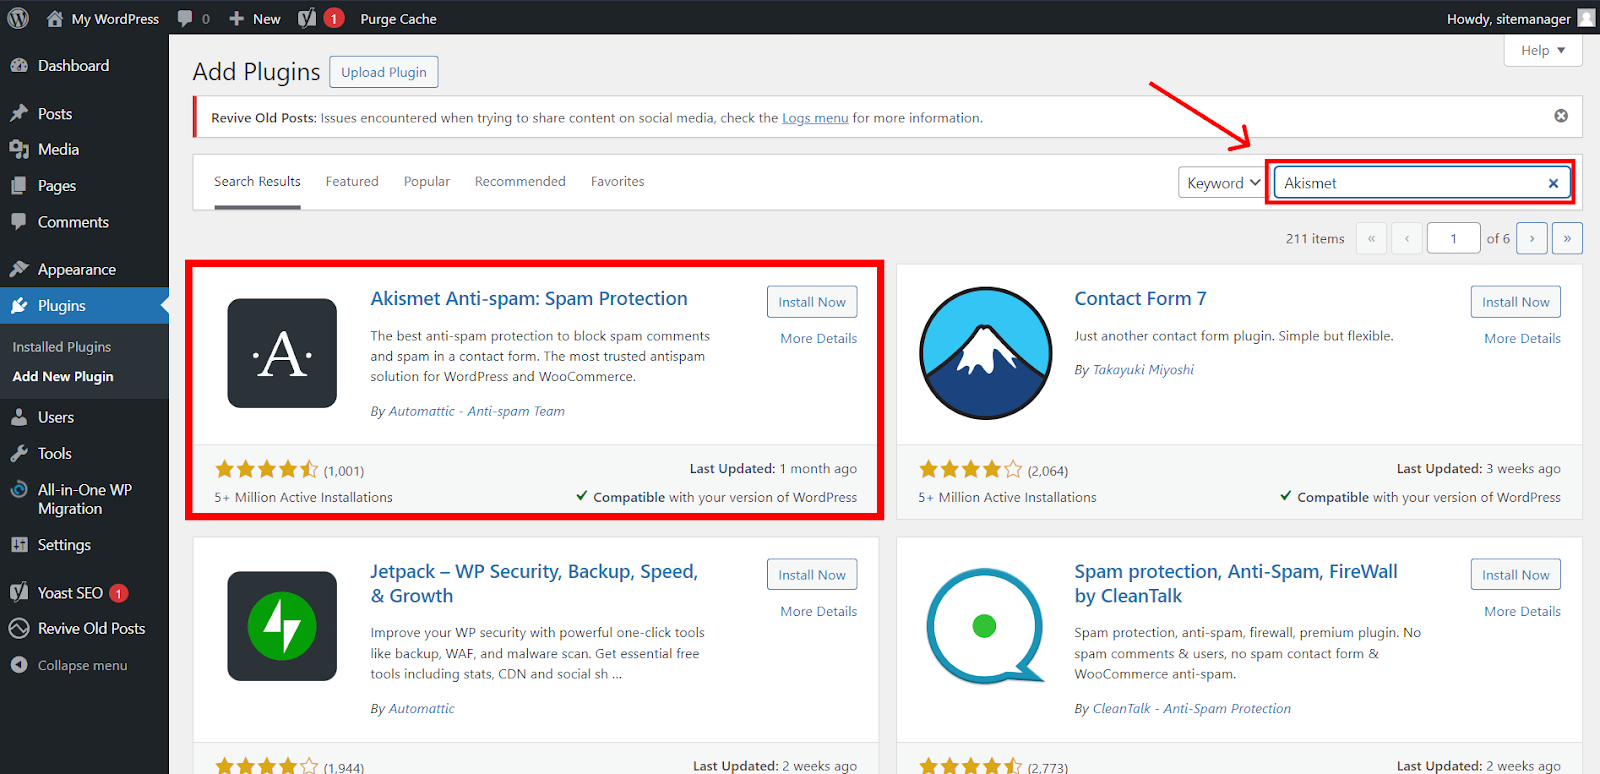 Search Bar For Searching Plugin - How To Install A WordPress Plugin